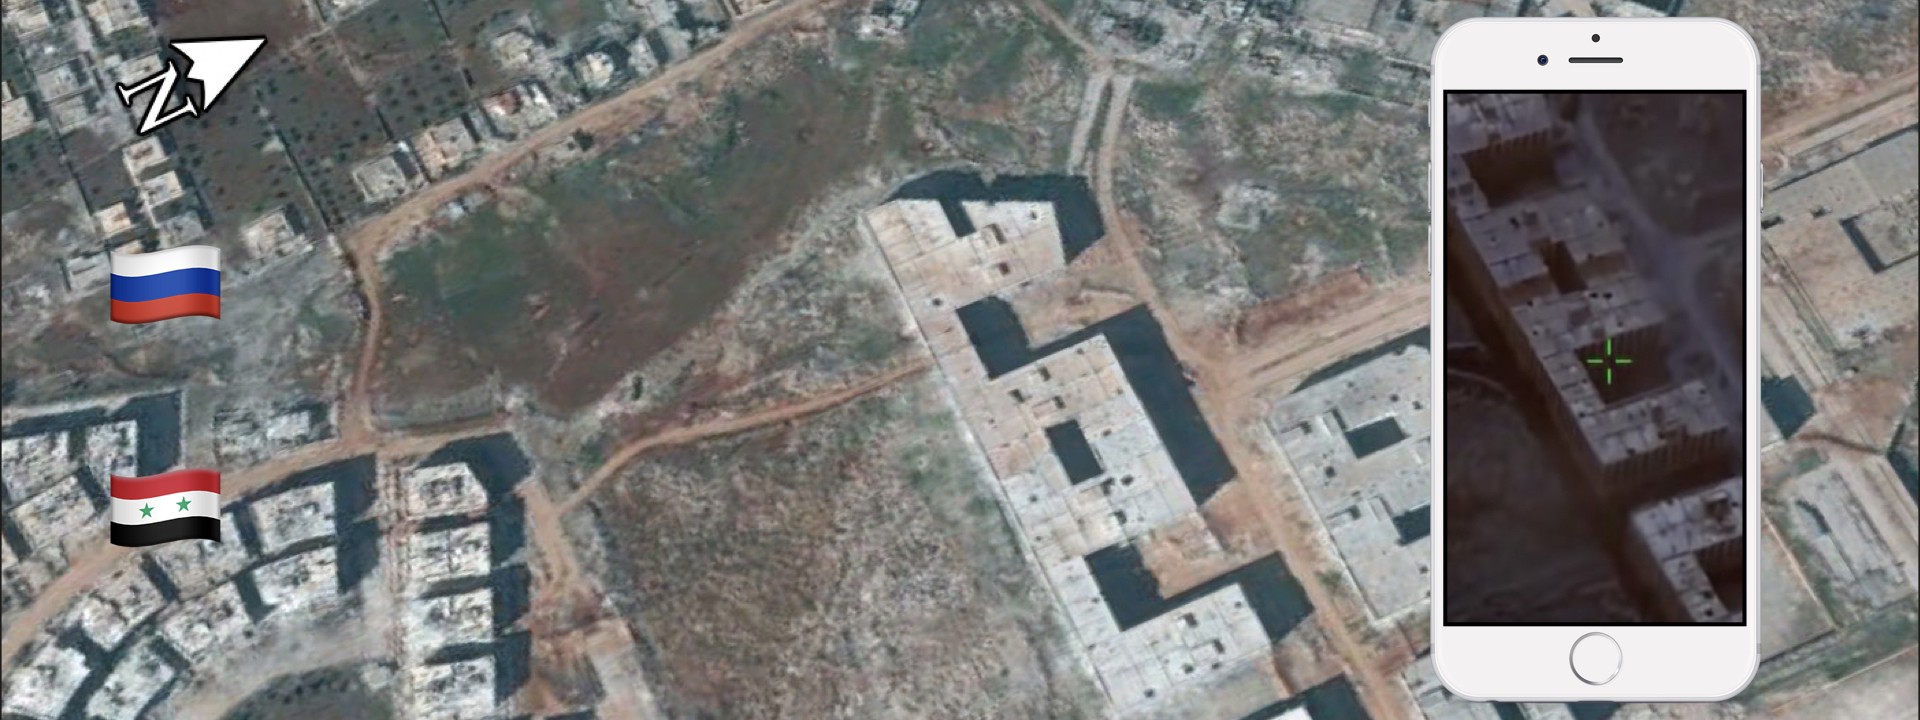 #BreakingSyria: Layramoun Factories Turned to Rubble Again